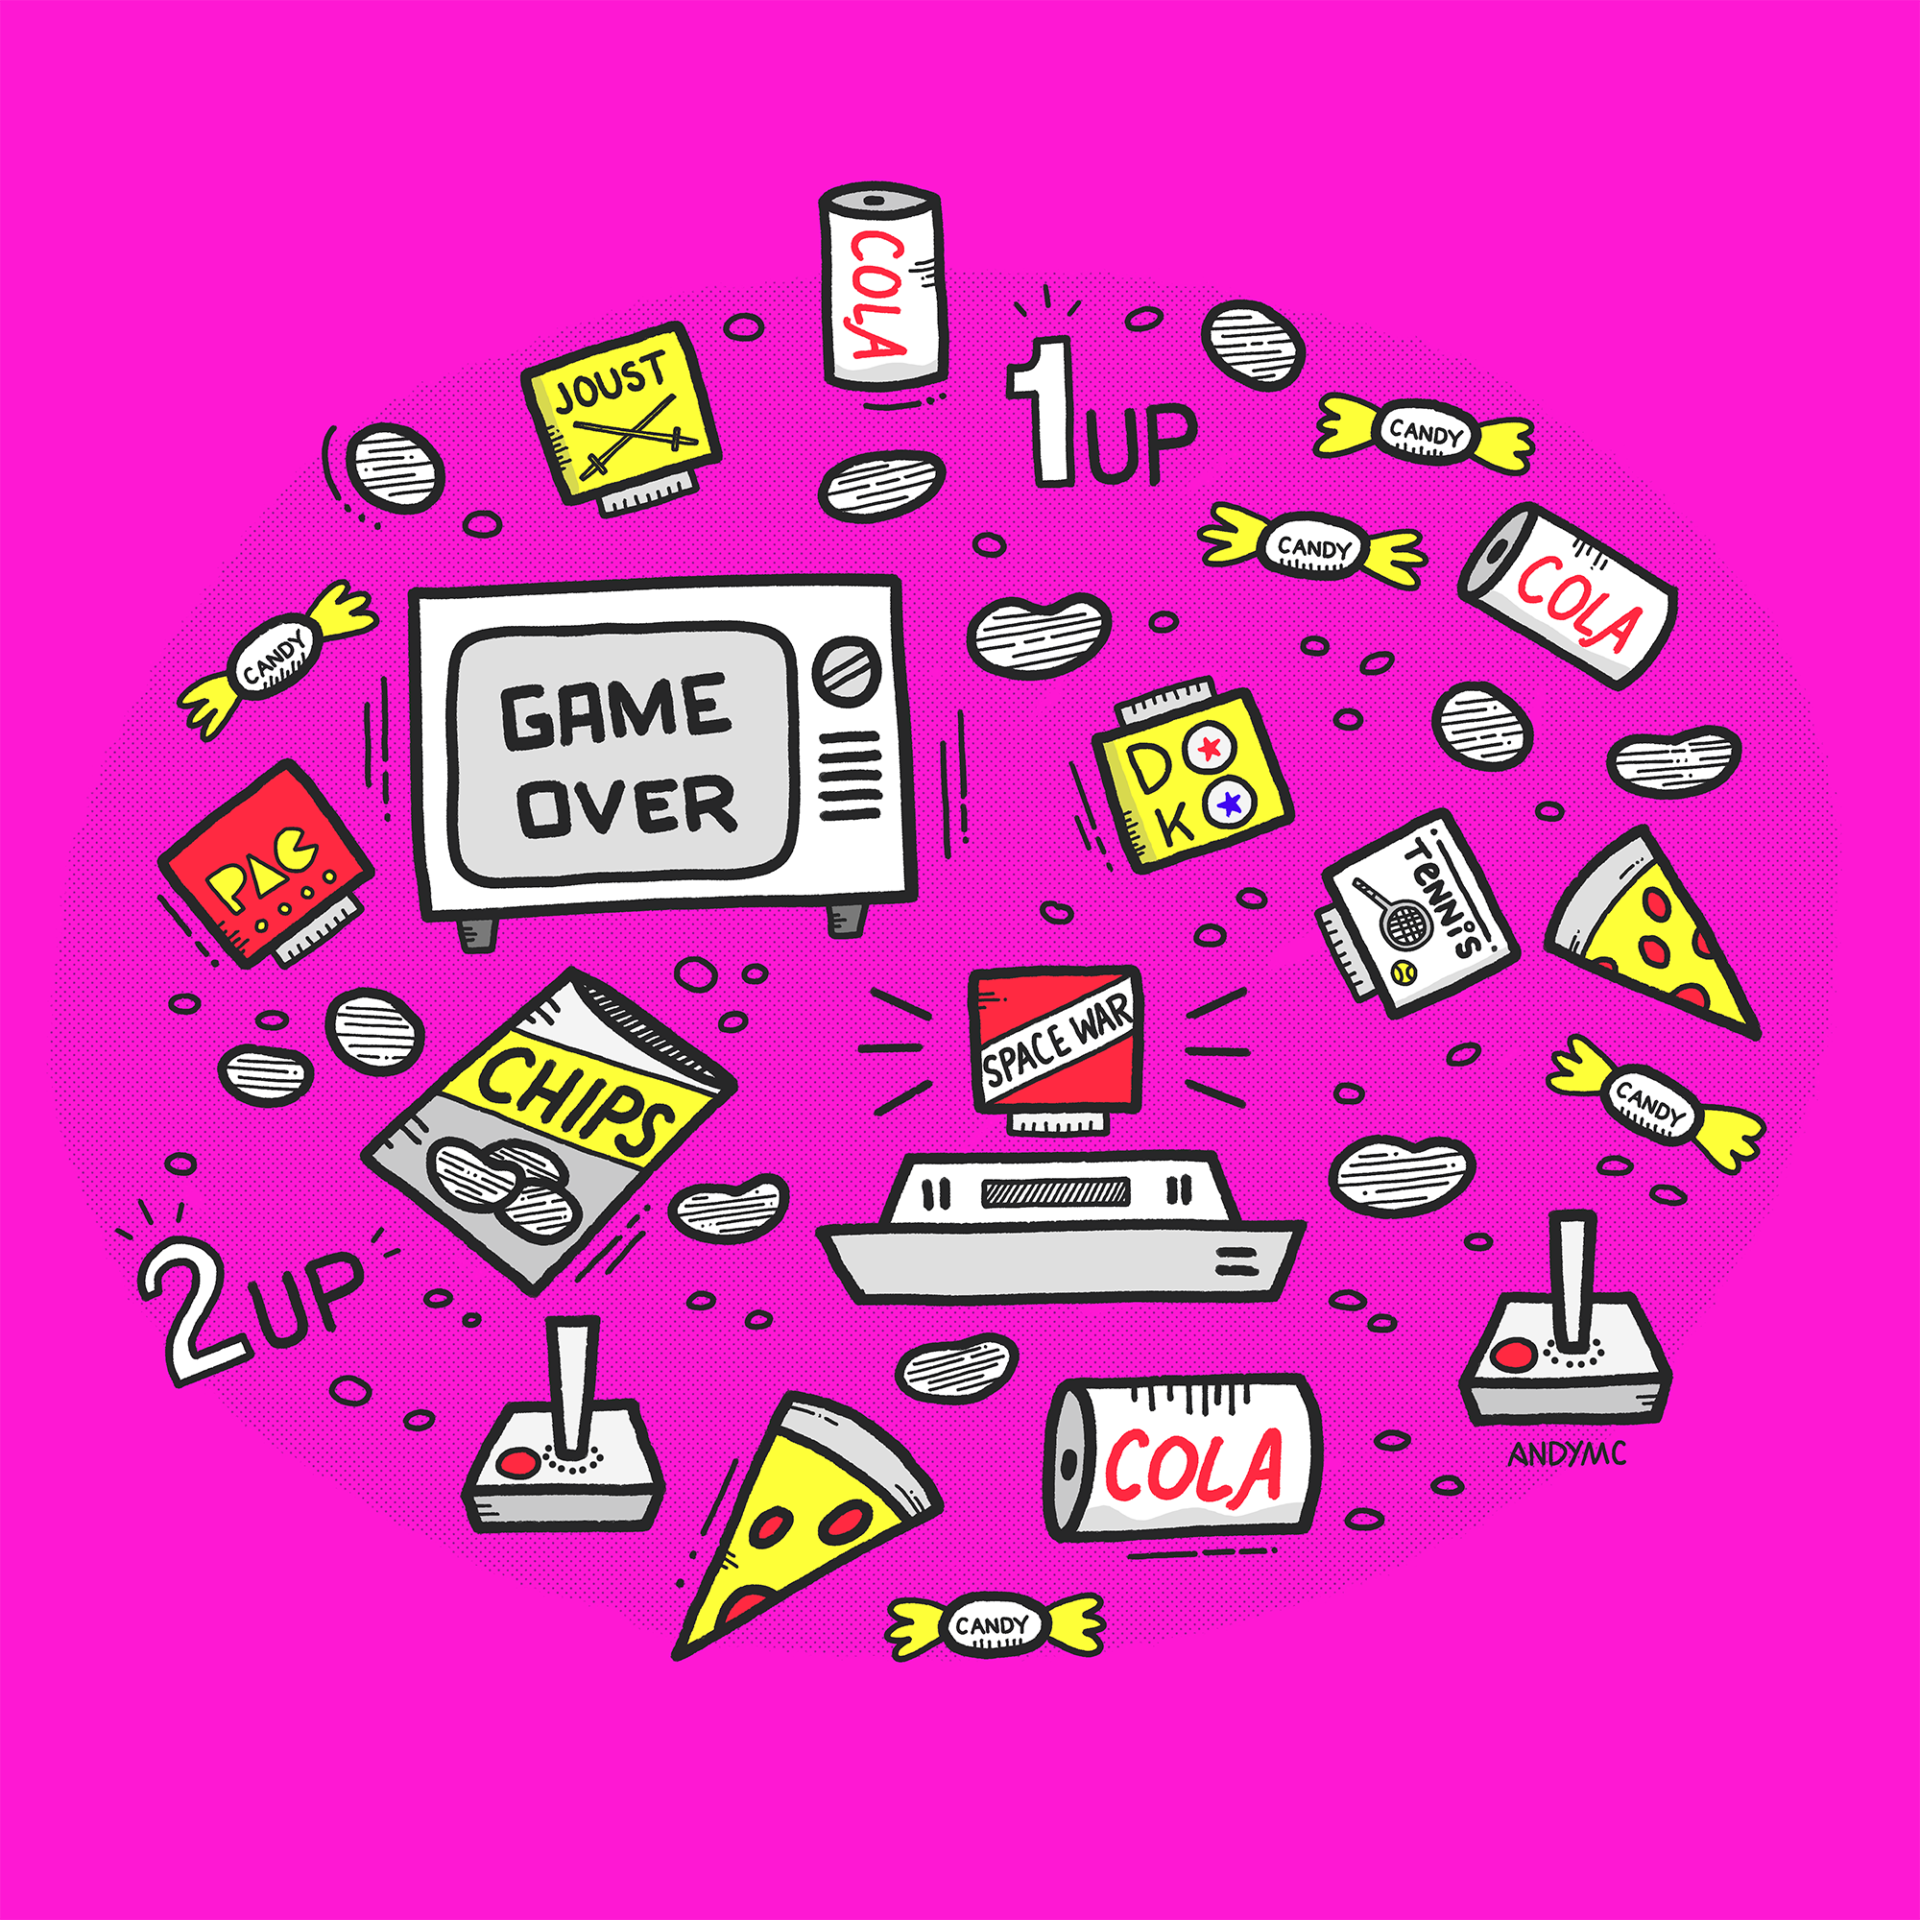 an illustration of an 80s video game console, pizza slices, and junk food